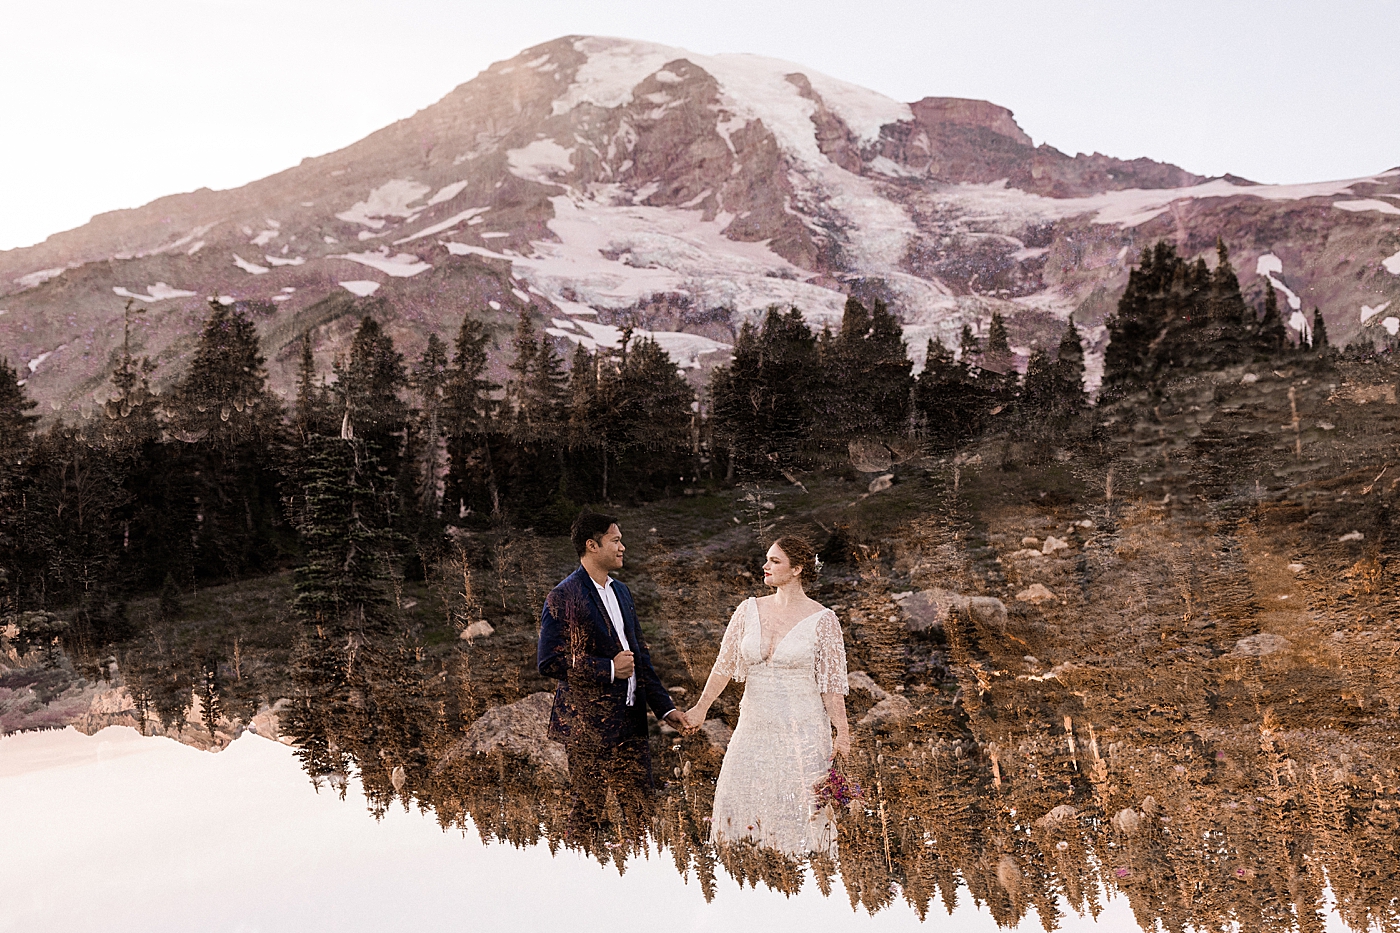 Double exposure of elopement photo in the mountains. Photo by Megan Montalvo Photography.